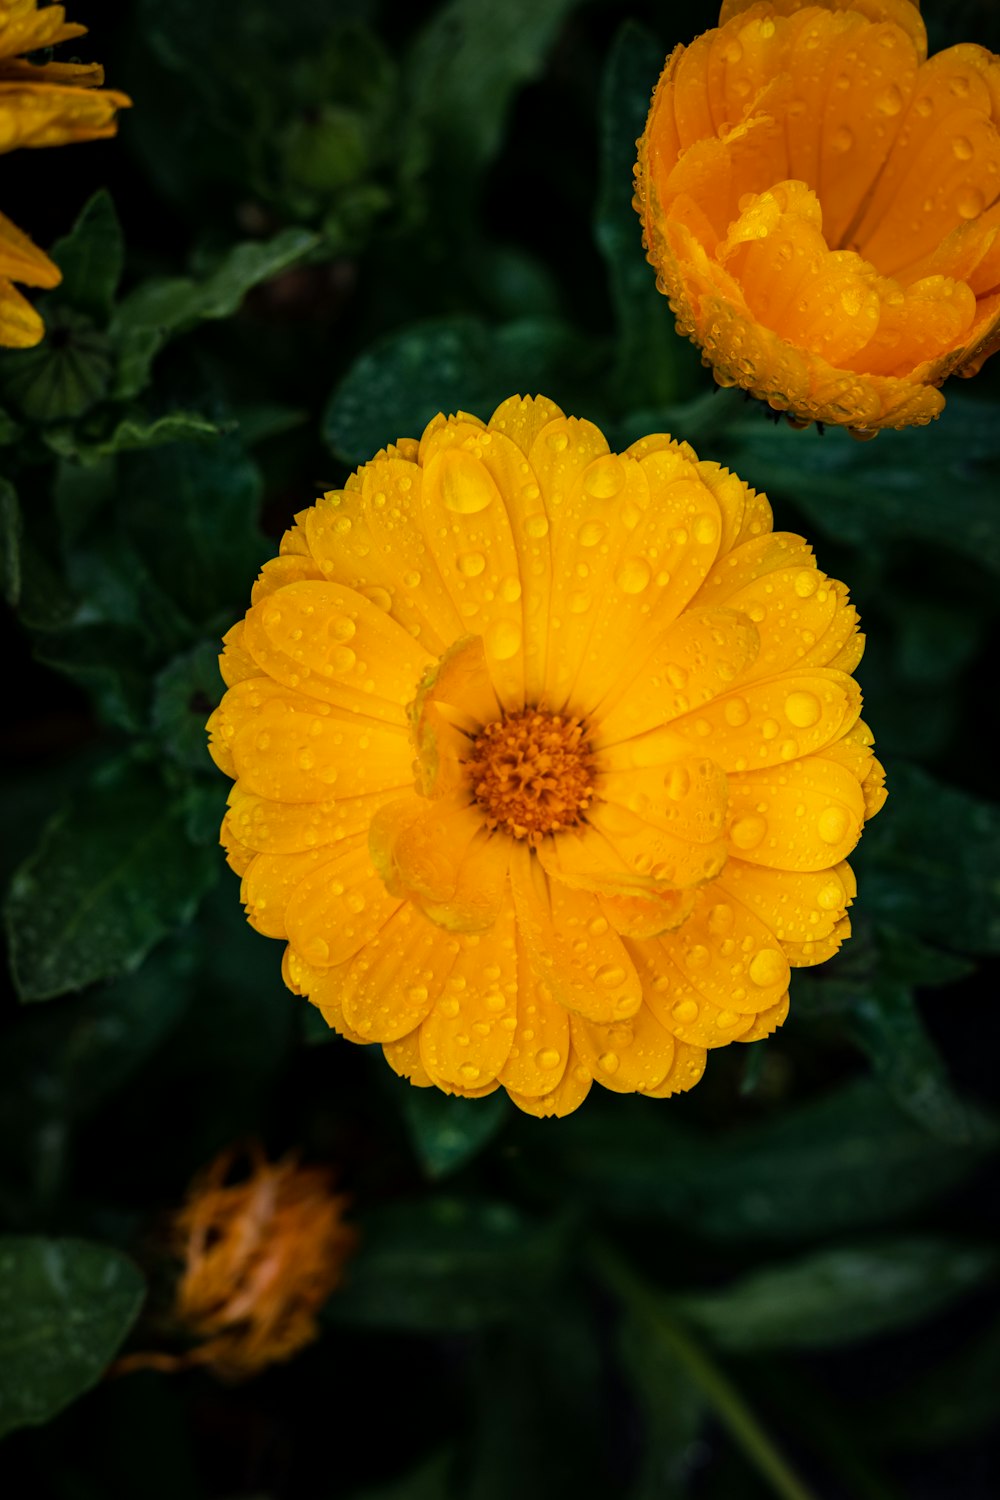 yellow flower with water droplets